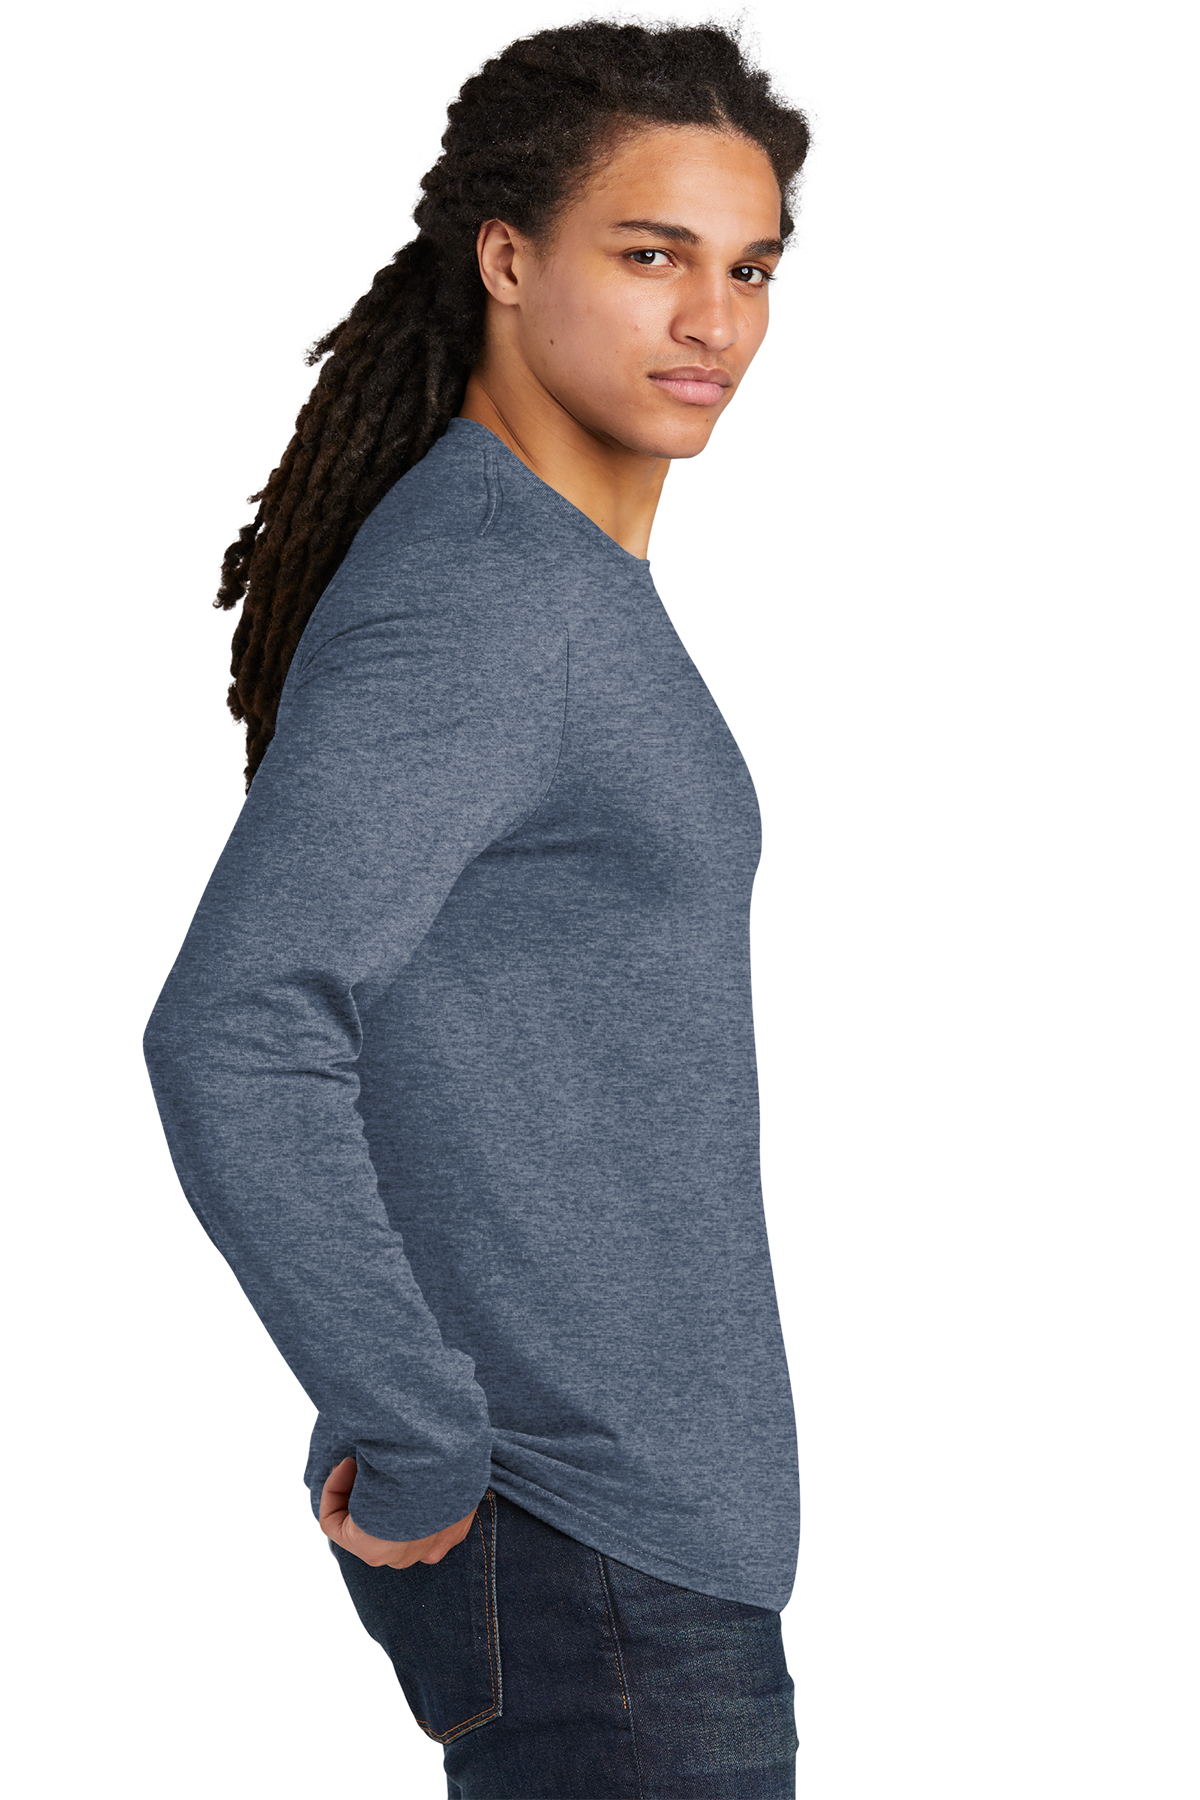 District Perfect Tri Long Sleeve Tee | Product | SanMar